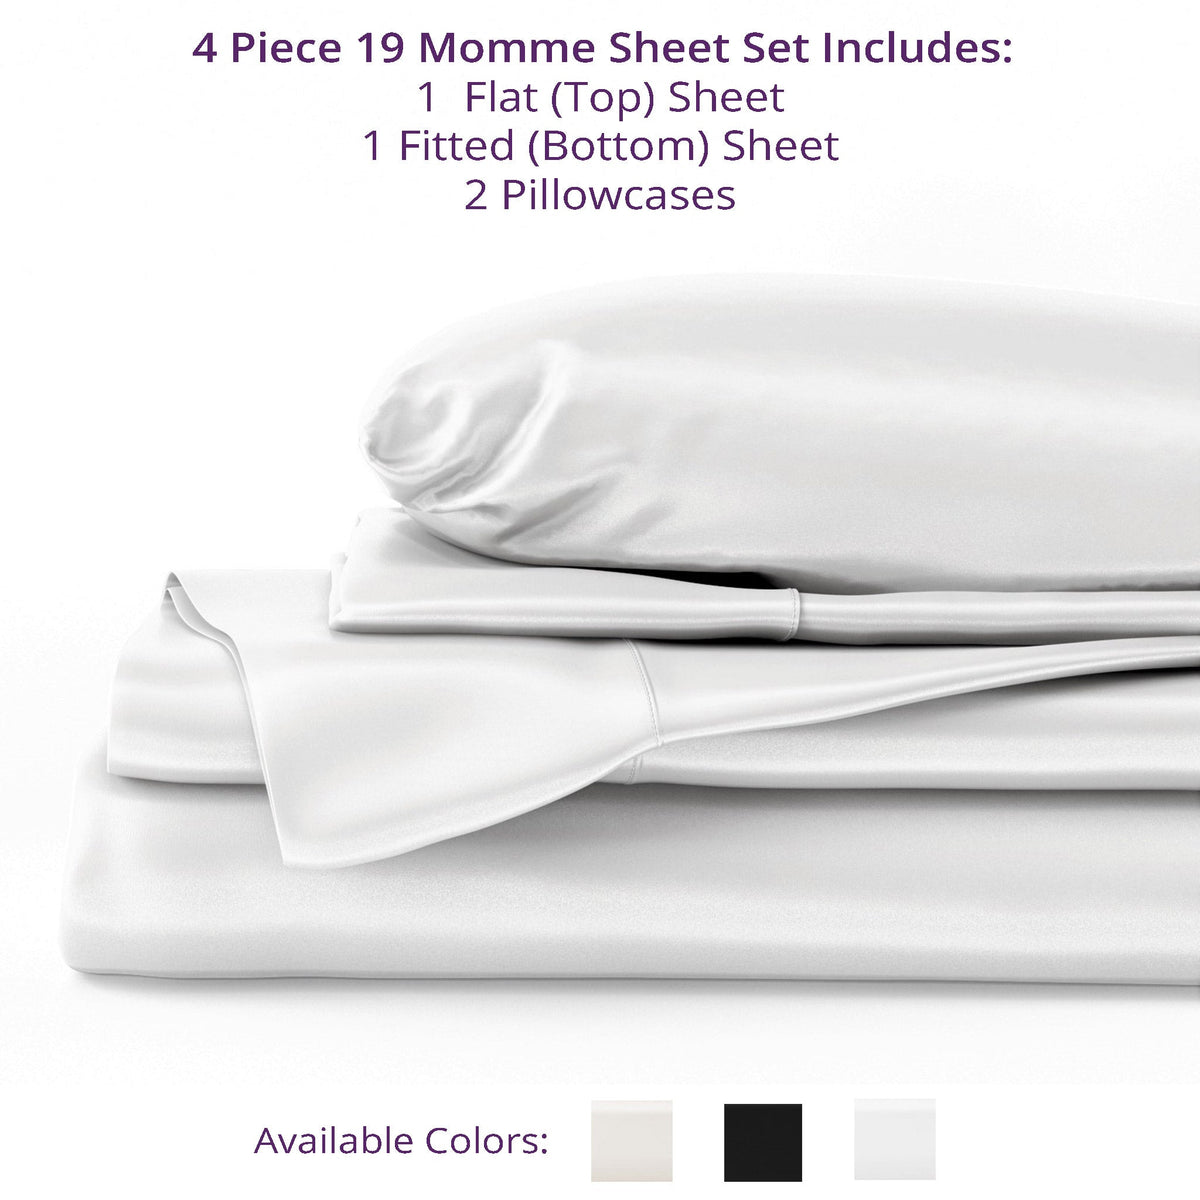 MPS Included in Sheet Set 19 Momme White